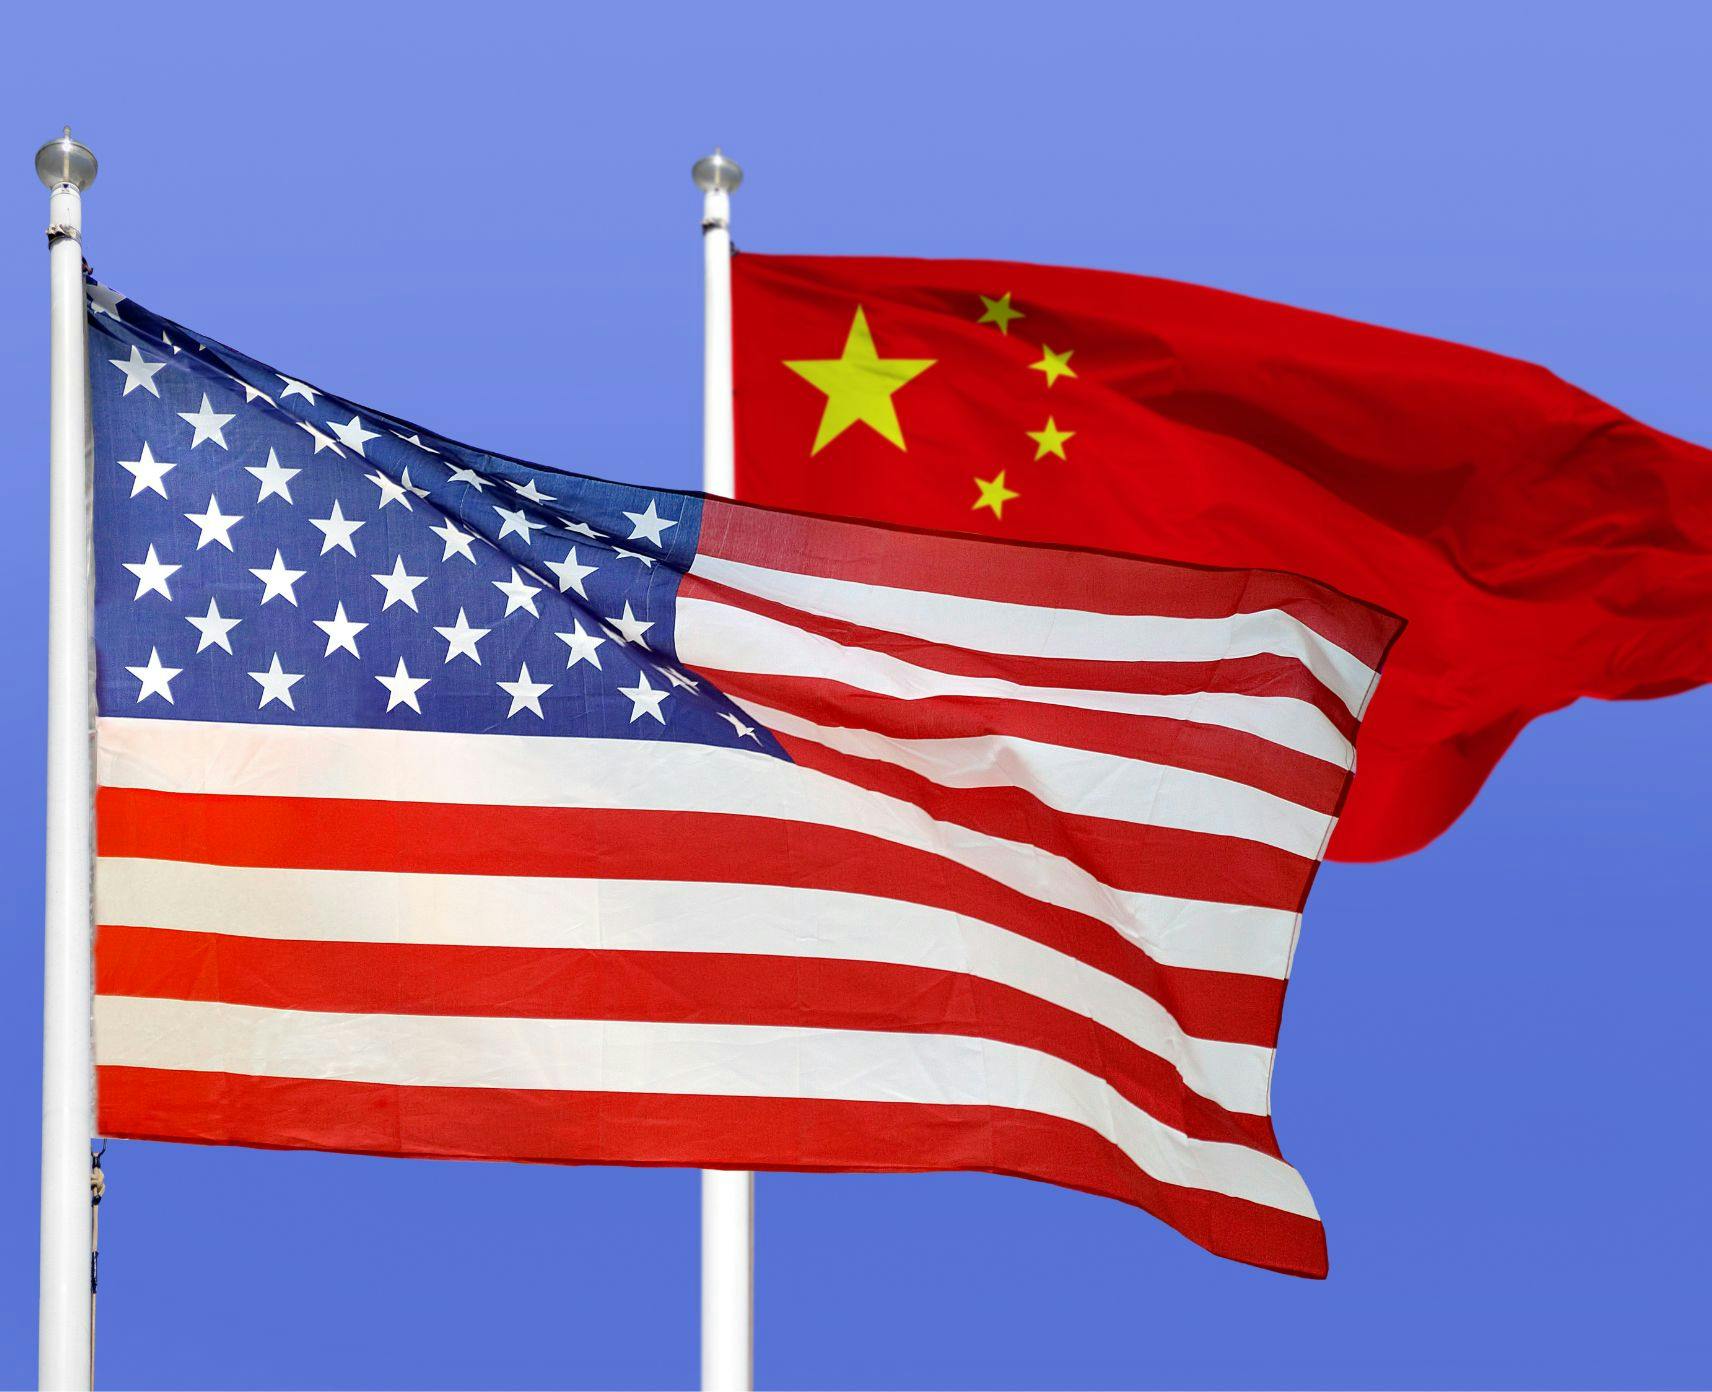 US and China flags blowing in the wind against a blue sky